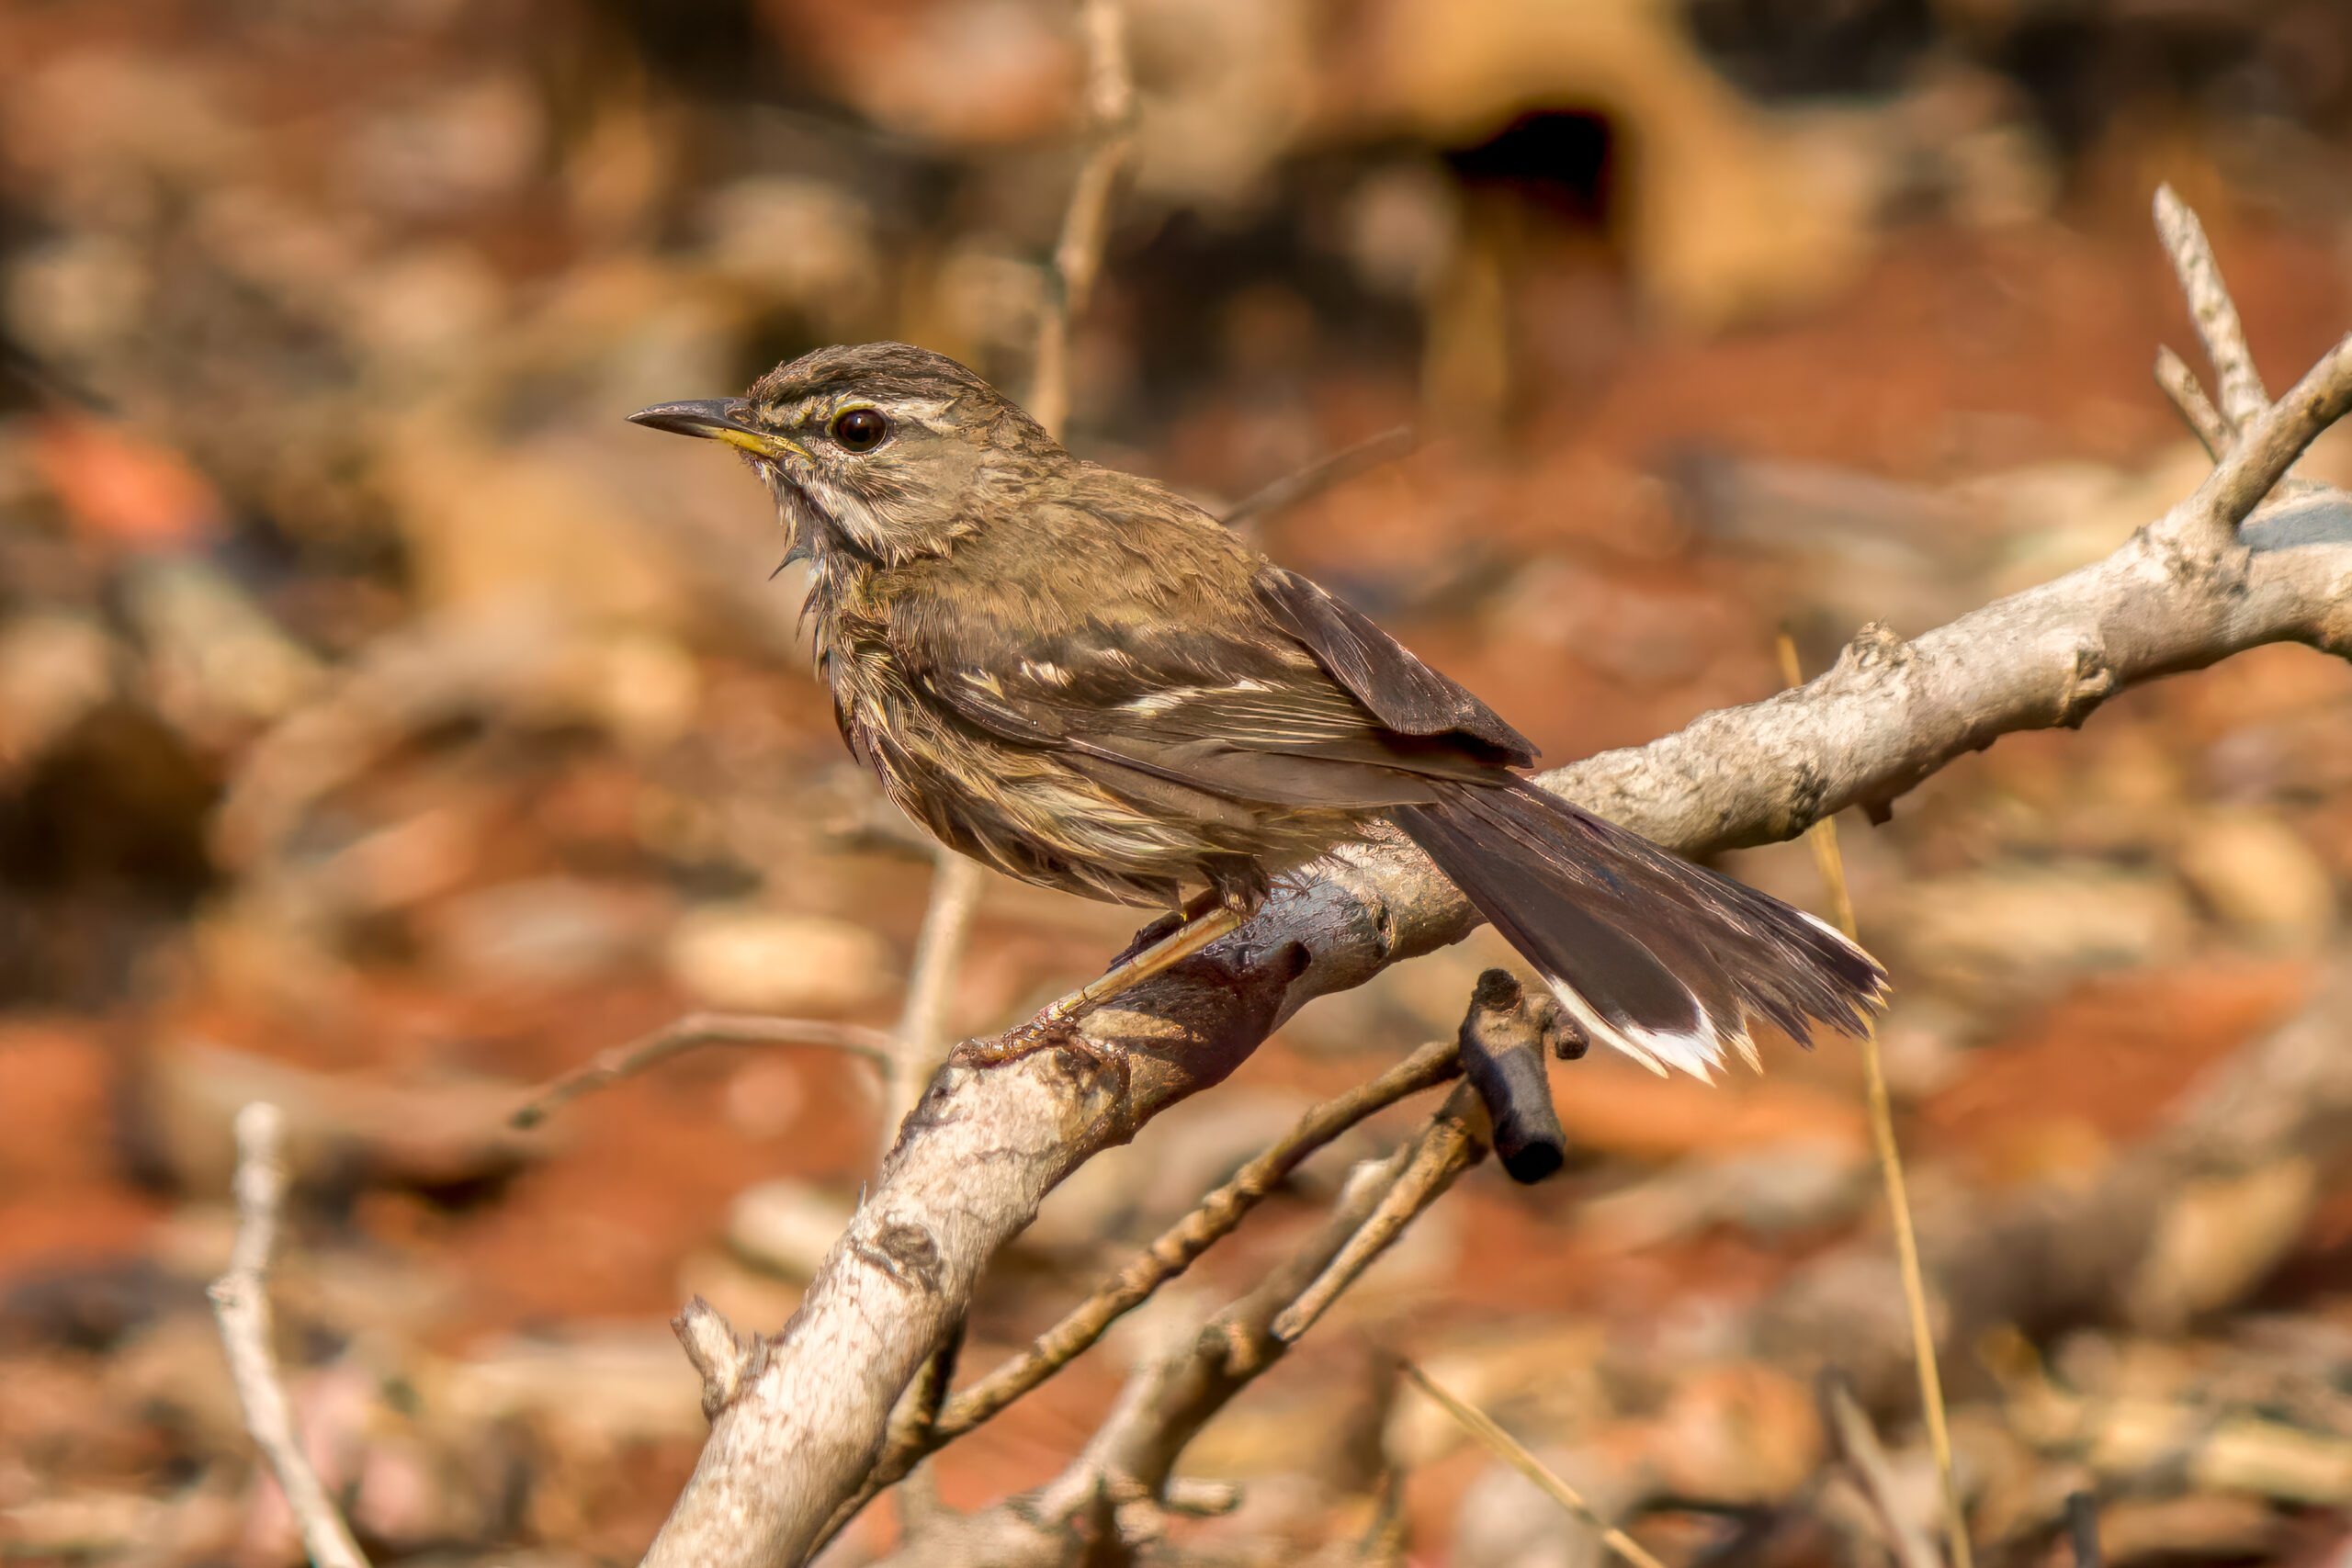 Red-backed Scrub-Robin (Cercotrichas leucophrys) @ Ndumo Game Reserve, South Africa. Photo: Håvard Rosenlund